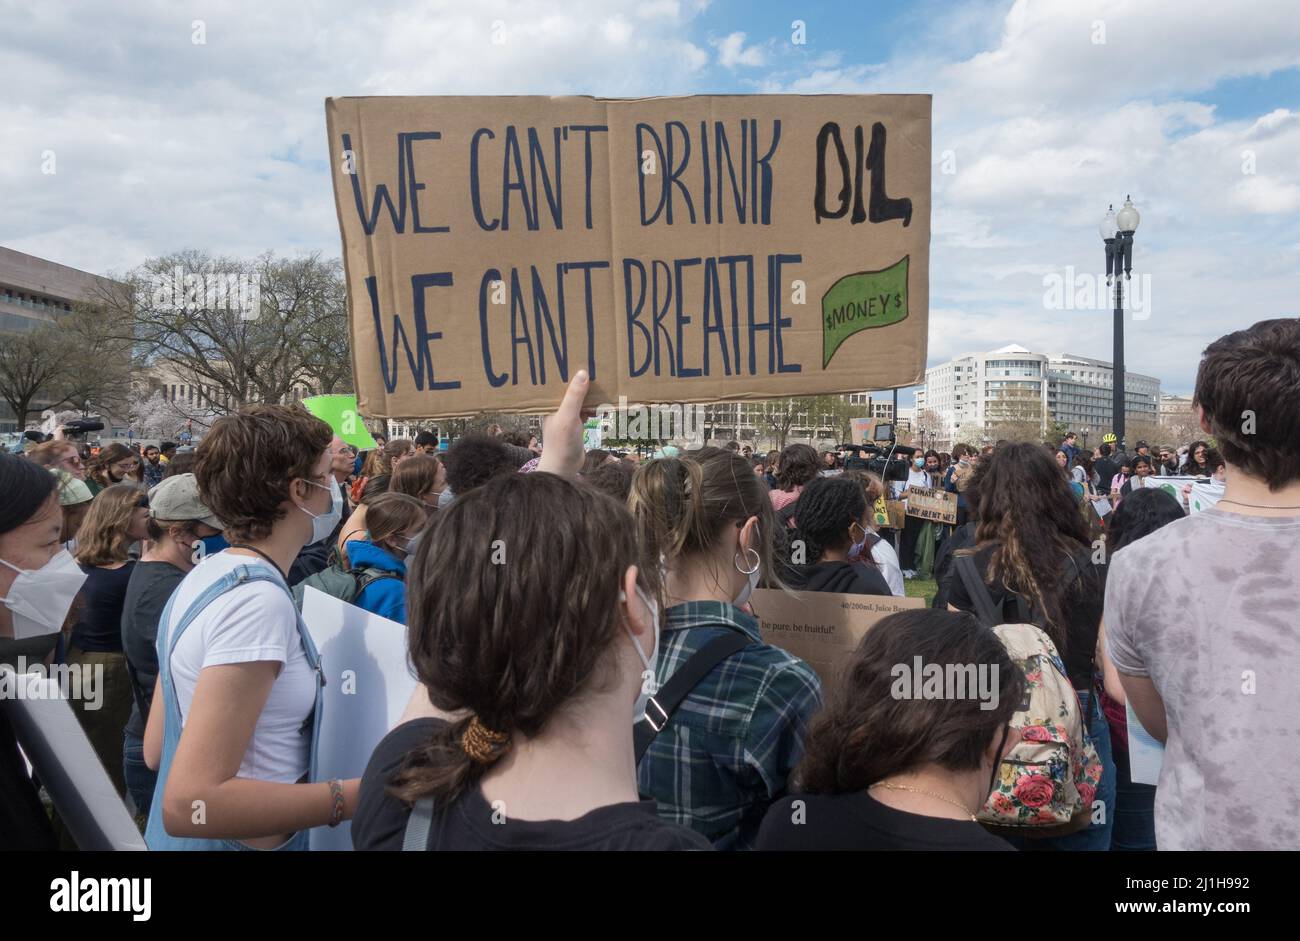 March 25, 2022. Demonstrators demanding President Biden take concrete actions to deal with climate change crisis at the Global Climate Strike rally near the US Capitol after marching from ta rally at the Whaire House. Stock Photo